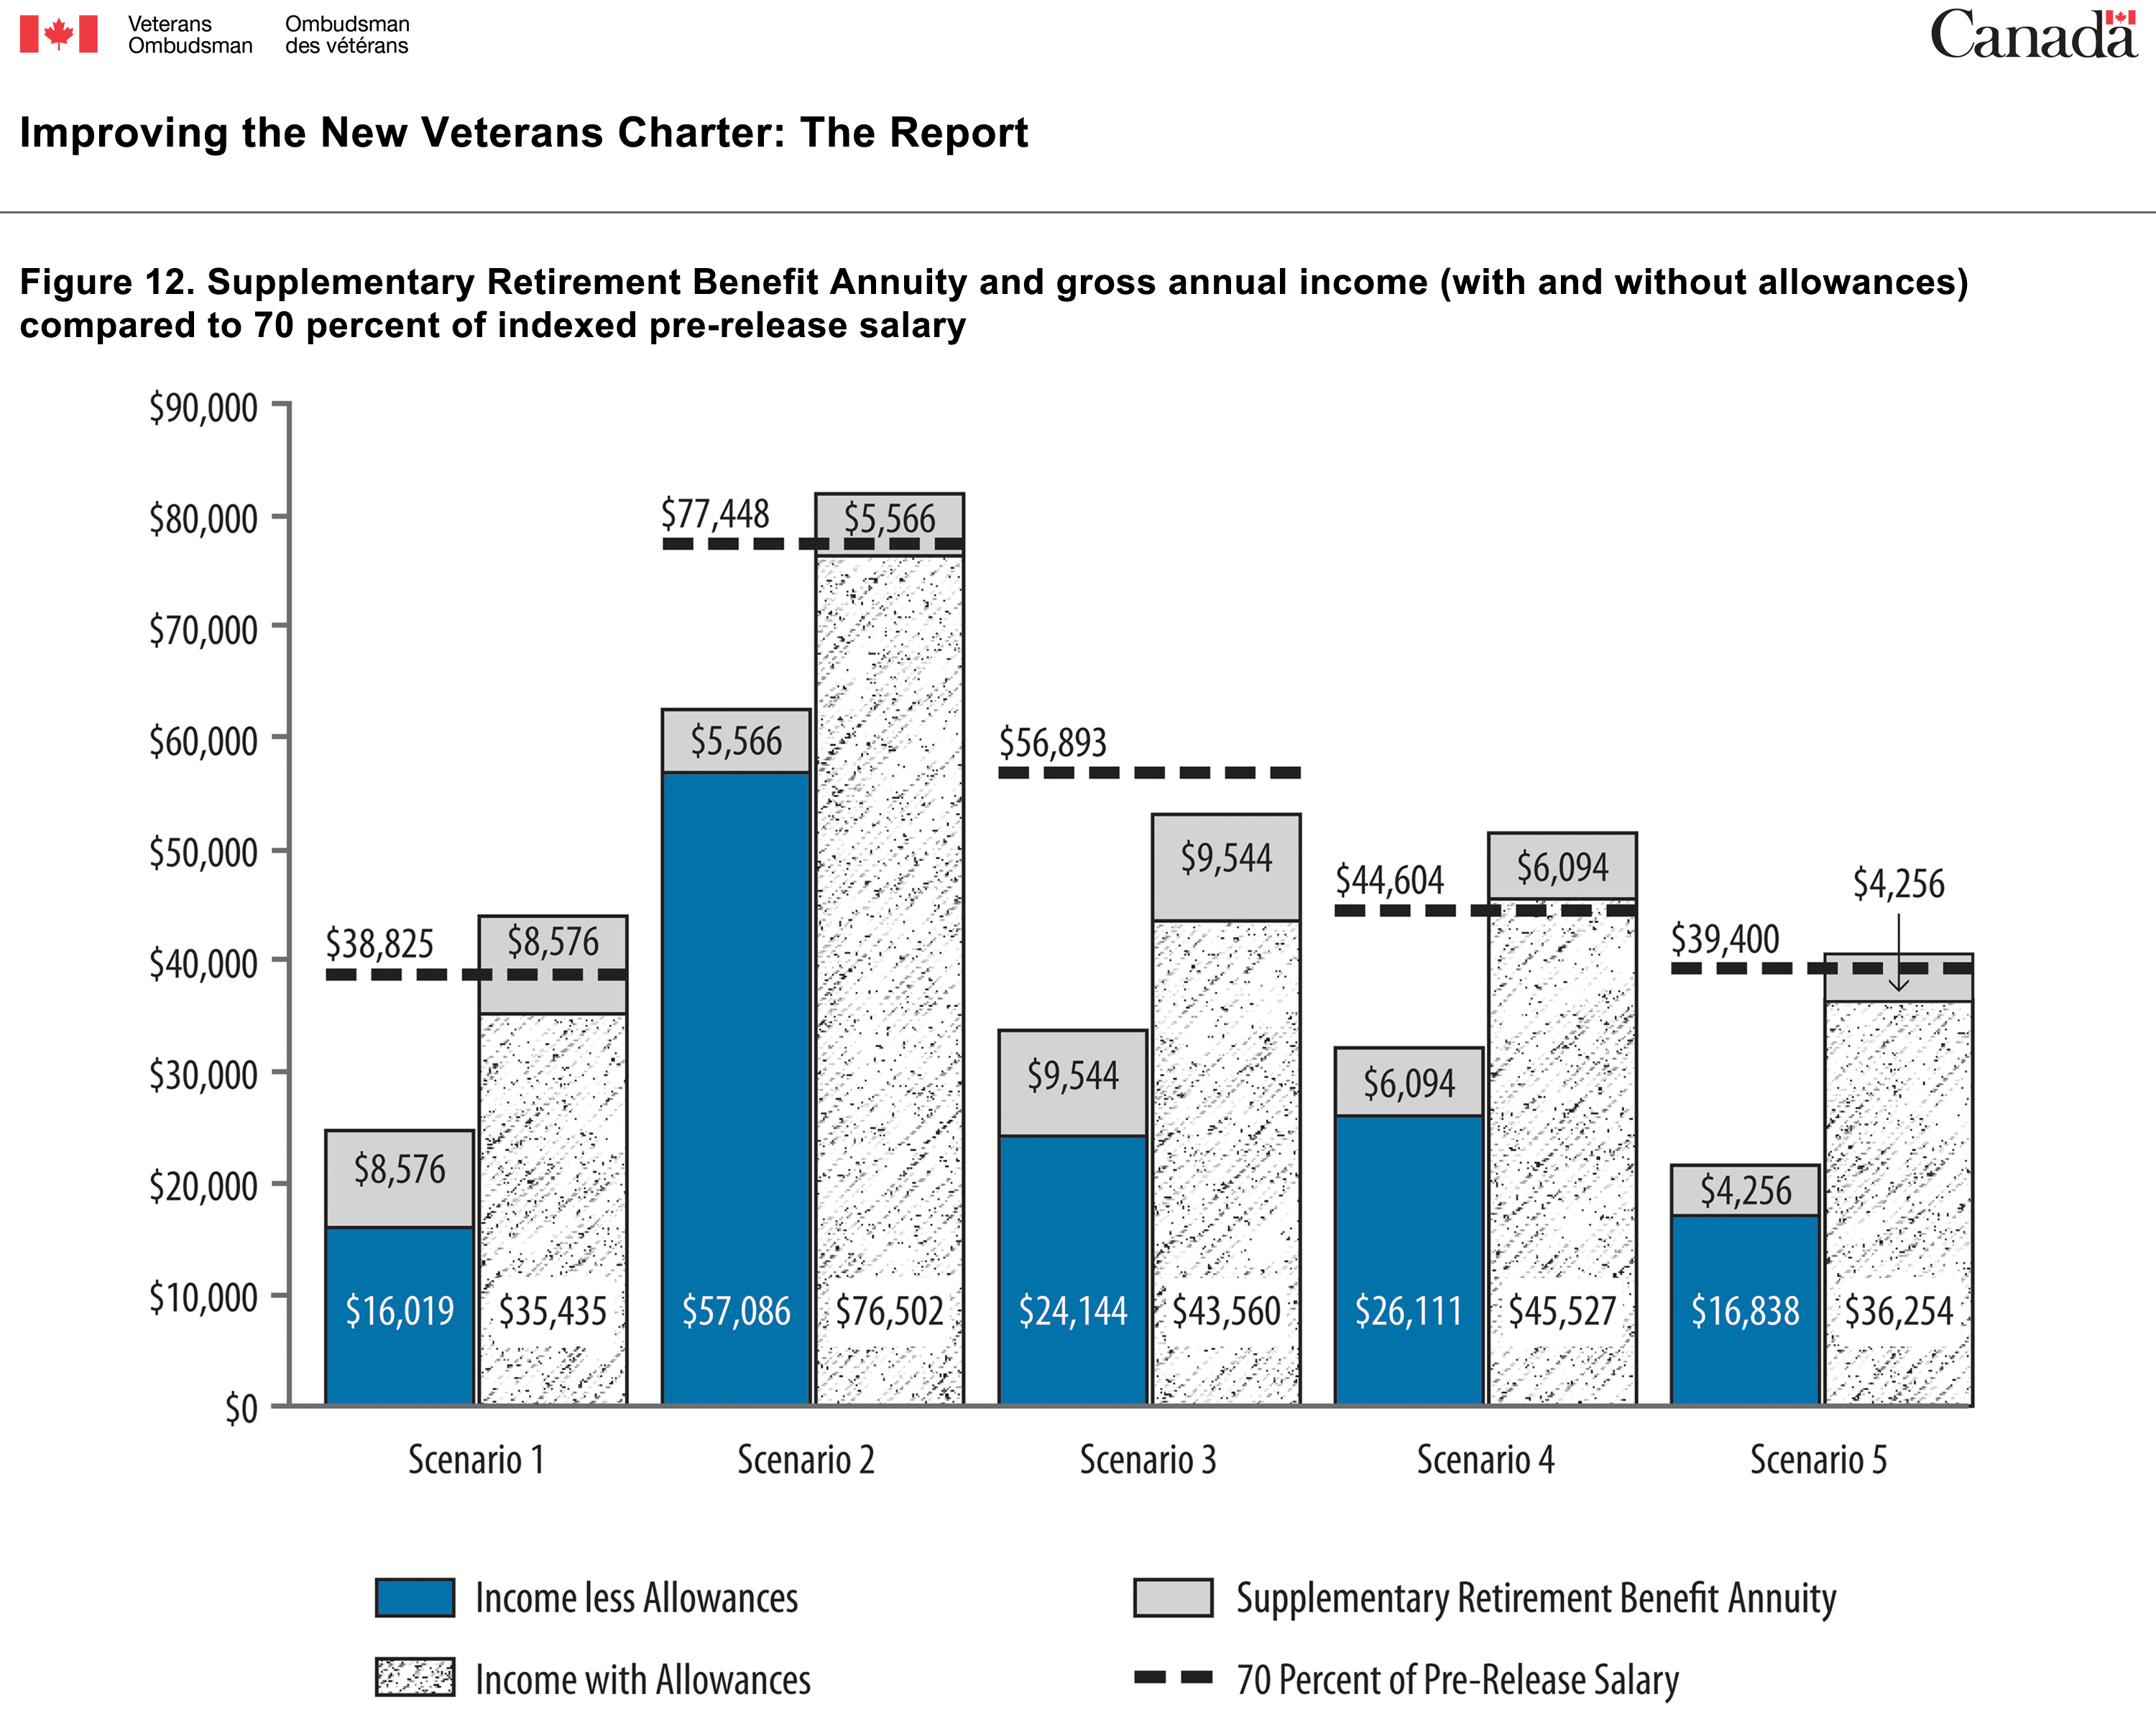 Figure 12. Supplementary Retirement Benefit Annuity and gross annual income (with and without allowances) compared to 70 percent of indexed pre-release salary